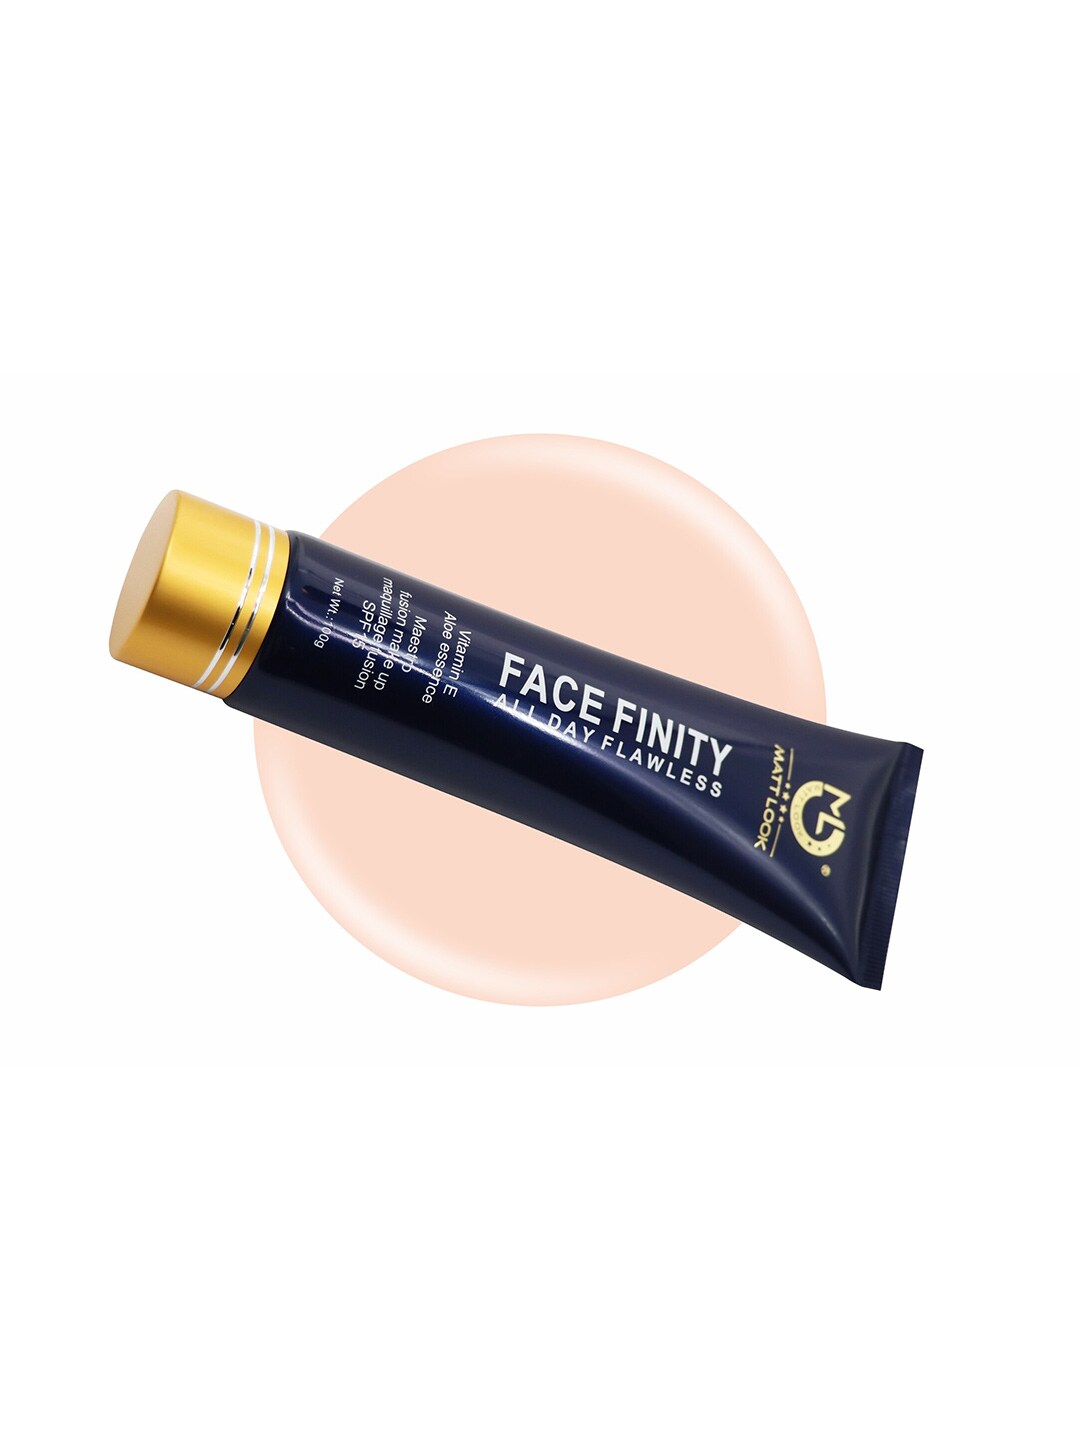 MATTLOOK Face Finity All Day Flawless - Meastro Fusion Make up Foundation - SPF15 - Fair Price in India